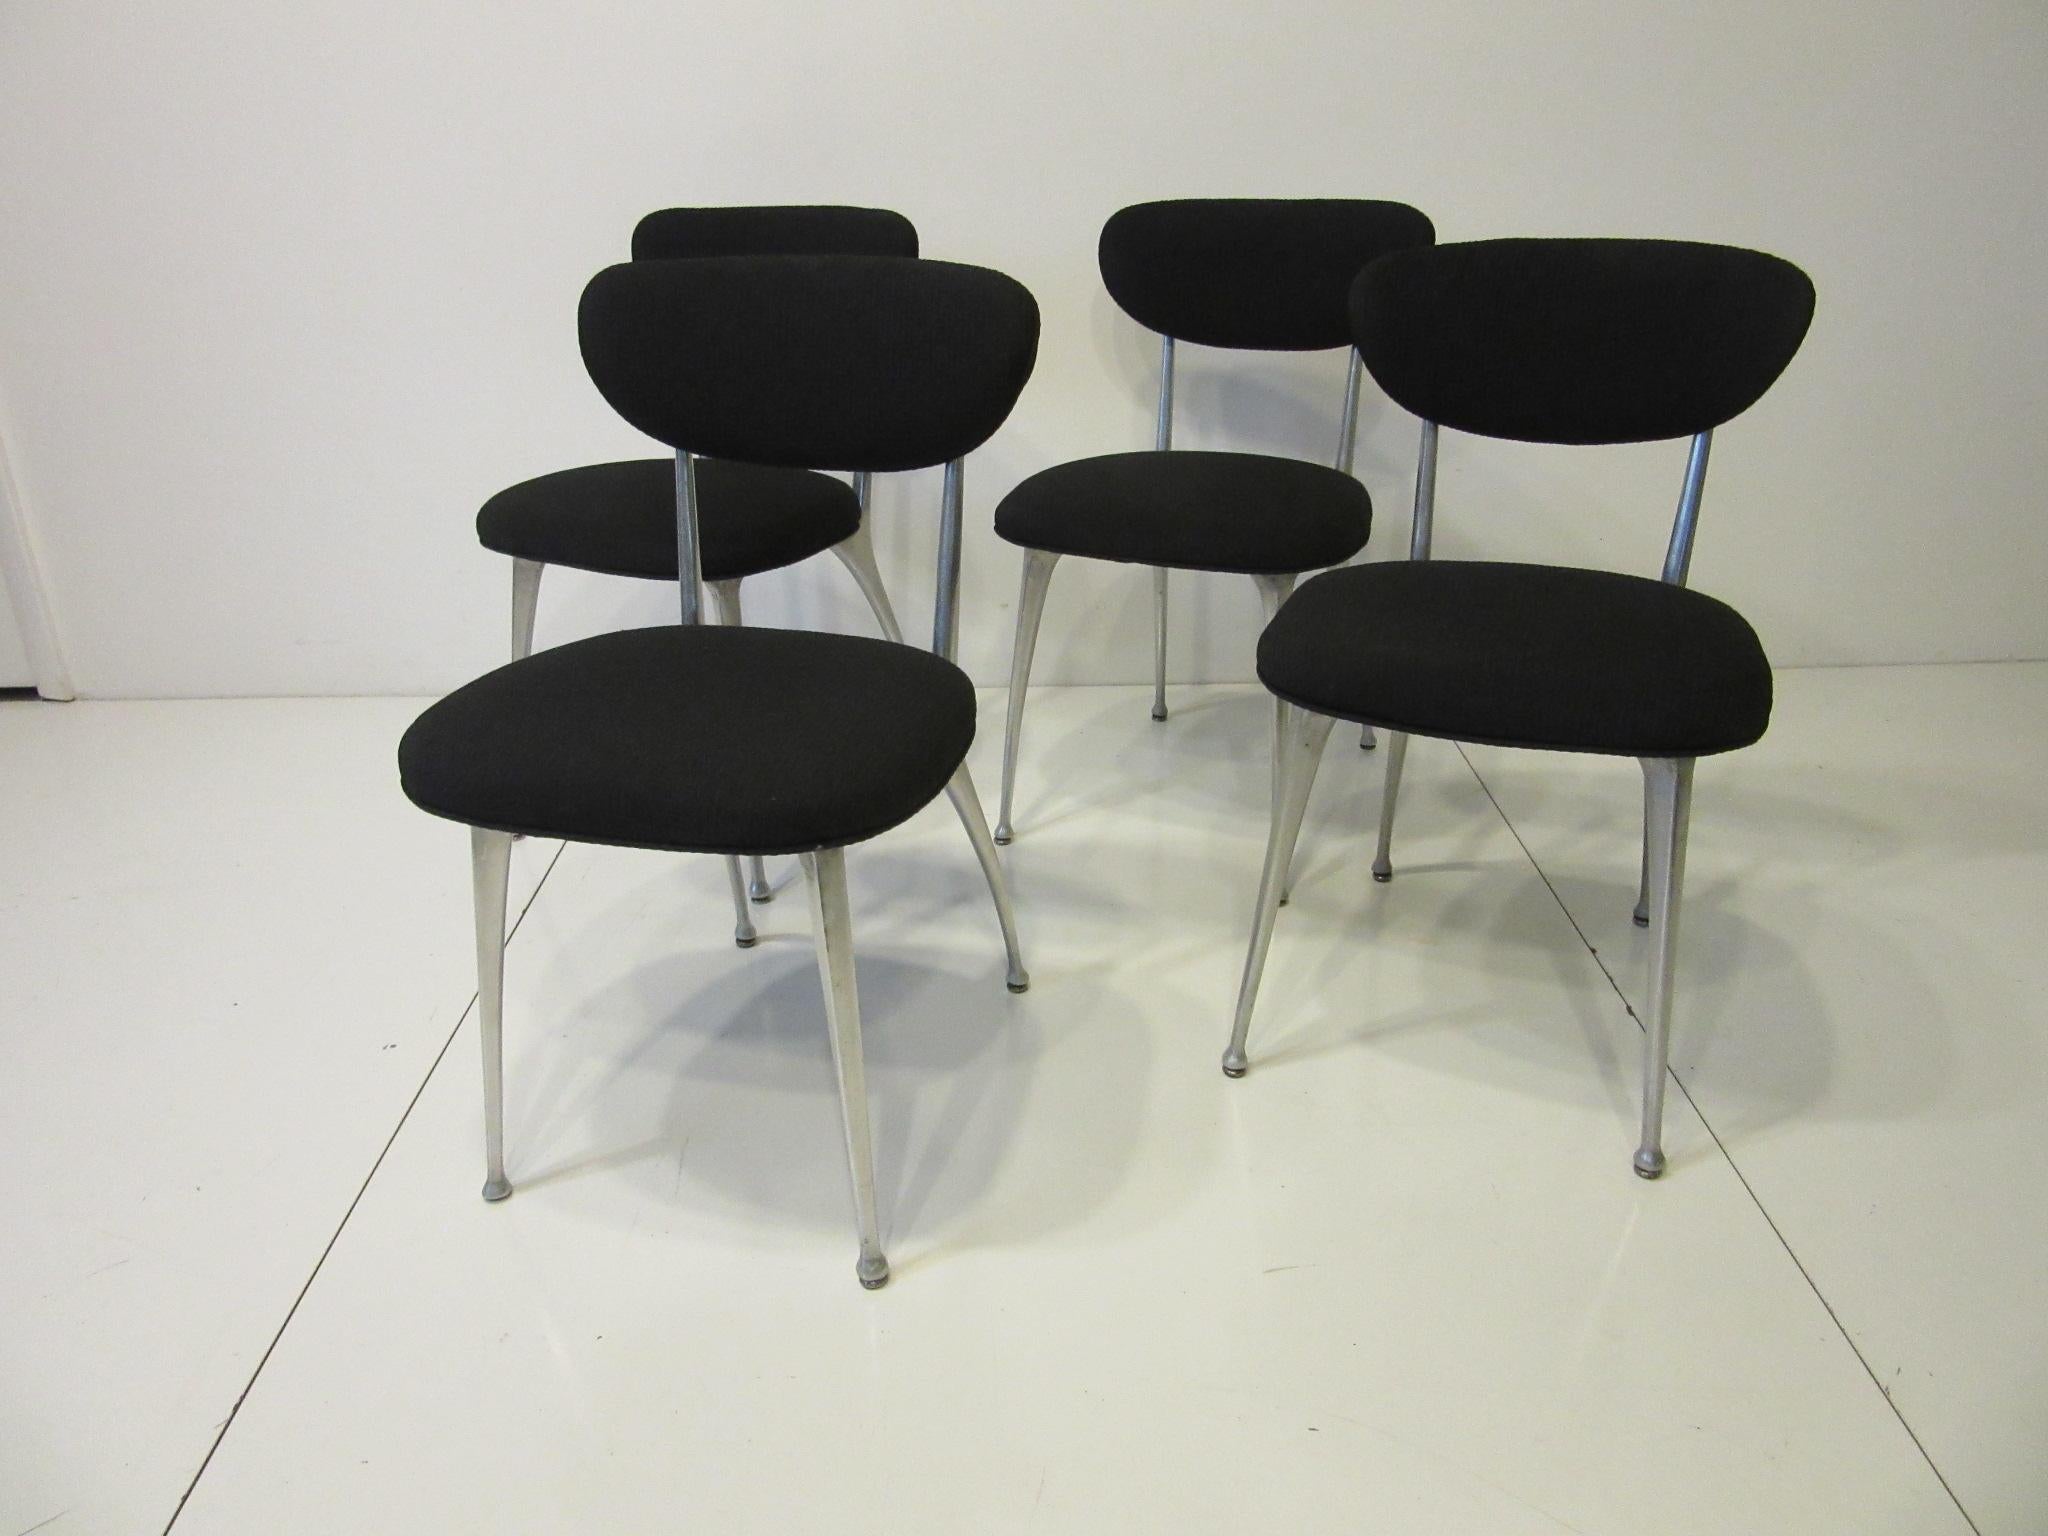 A set of four Gazelle chairs with cast aluminum frames and upholstered seats and backs with a textured black contract fabric. Called the Gazelle chair because of the strong but thin and light looking legs as in the African Gazelle, comfortable and